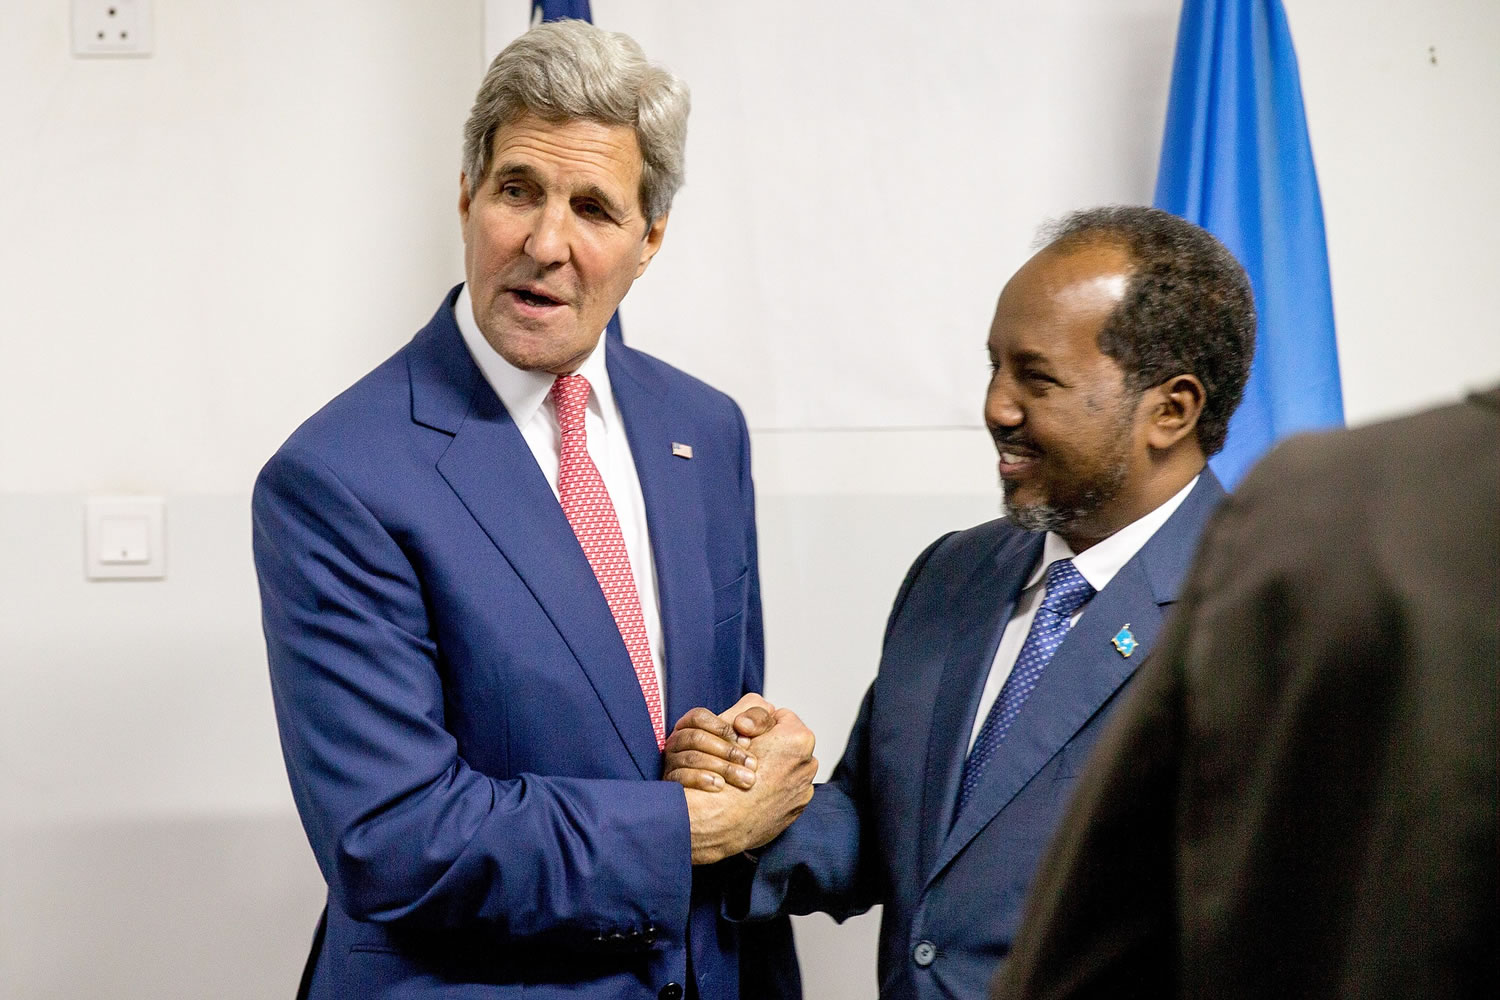 Secretary of State John Kerry meets with President Hassan Sheikh Mohammed, right, Tuesday at the airport in Mogadishu, Somalia, in a show of solidarity with the Somalian government trying to defeat to al-Qaida-allied militants and end decades of war in the African country.